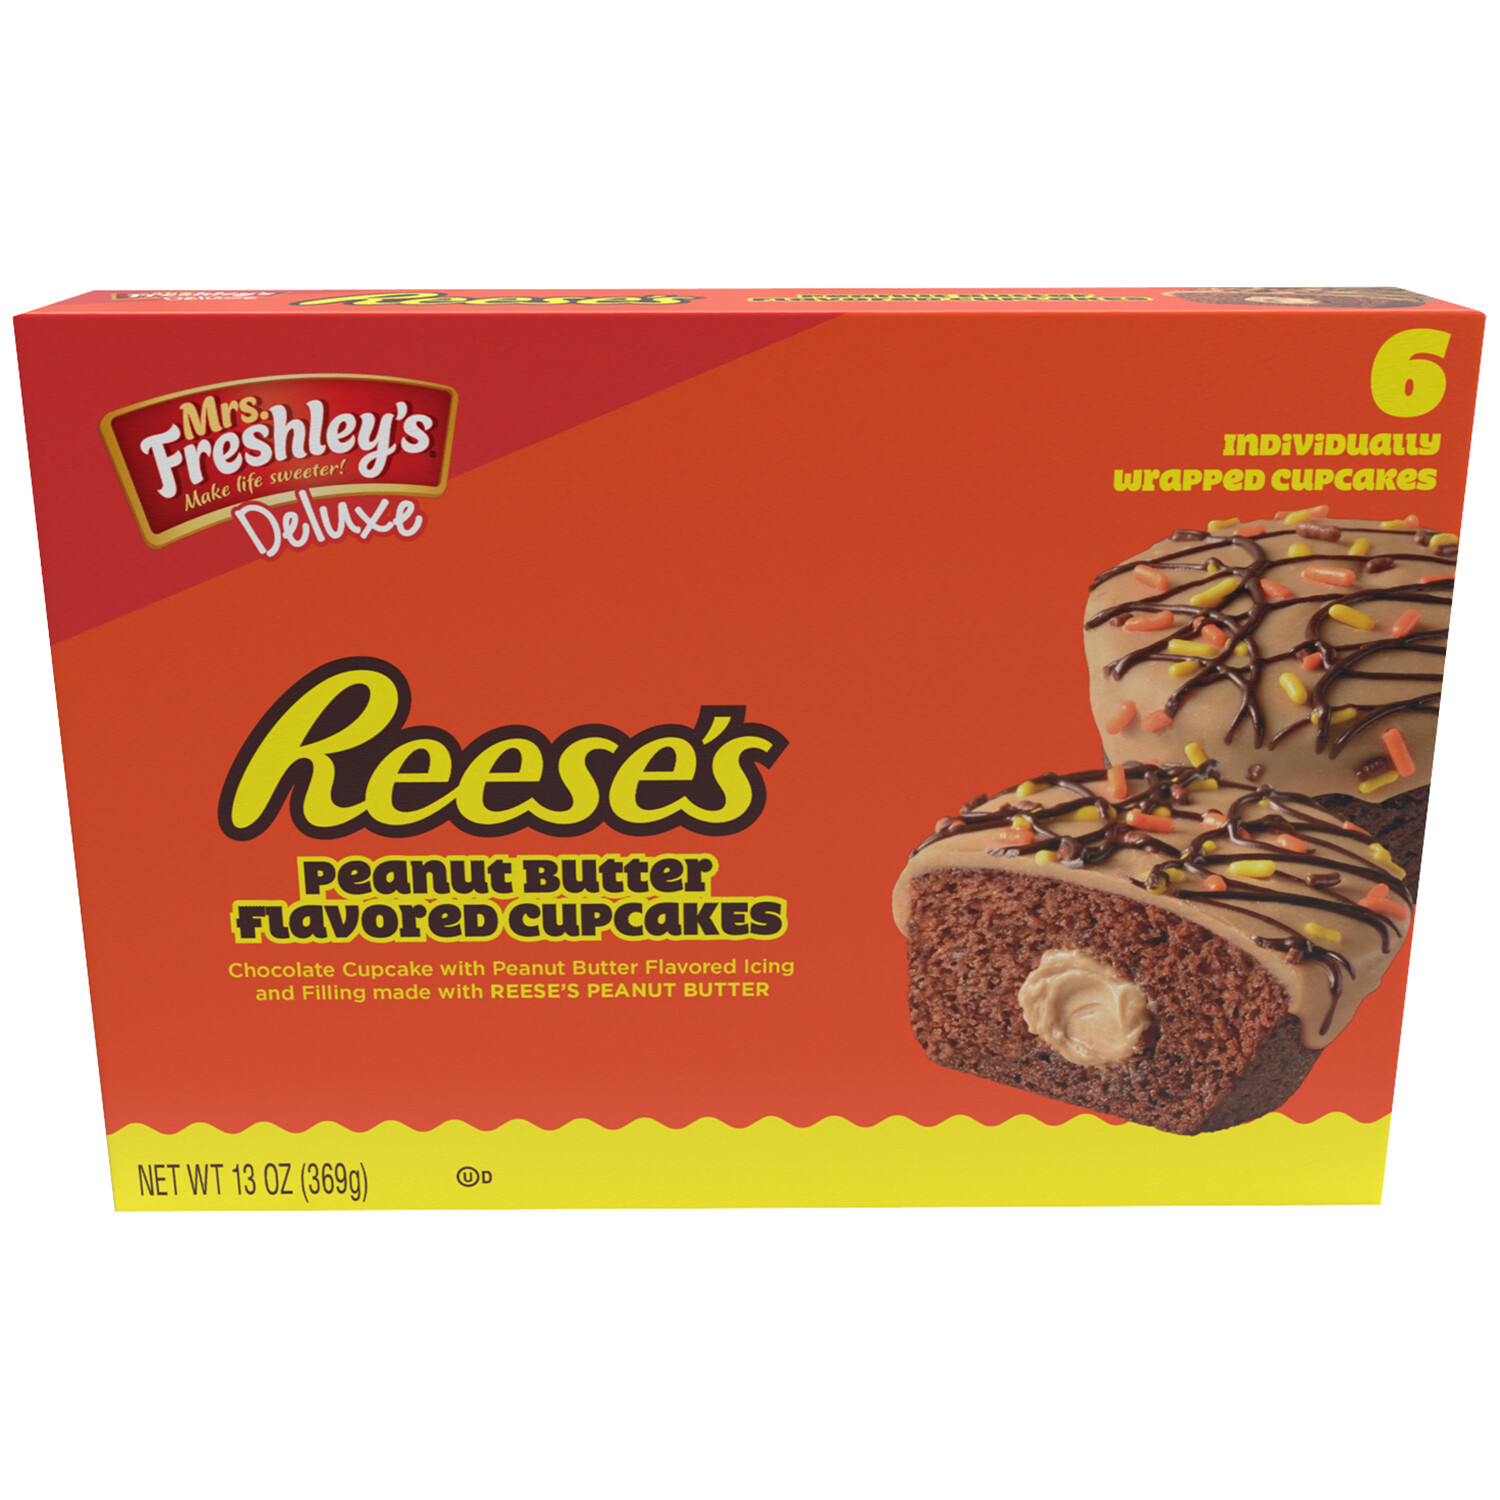 Mrs. Freshley's - Reese's Peanut Butter Flavored Cupcakes 6ct